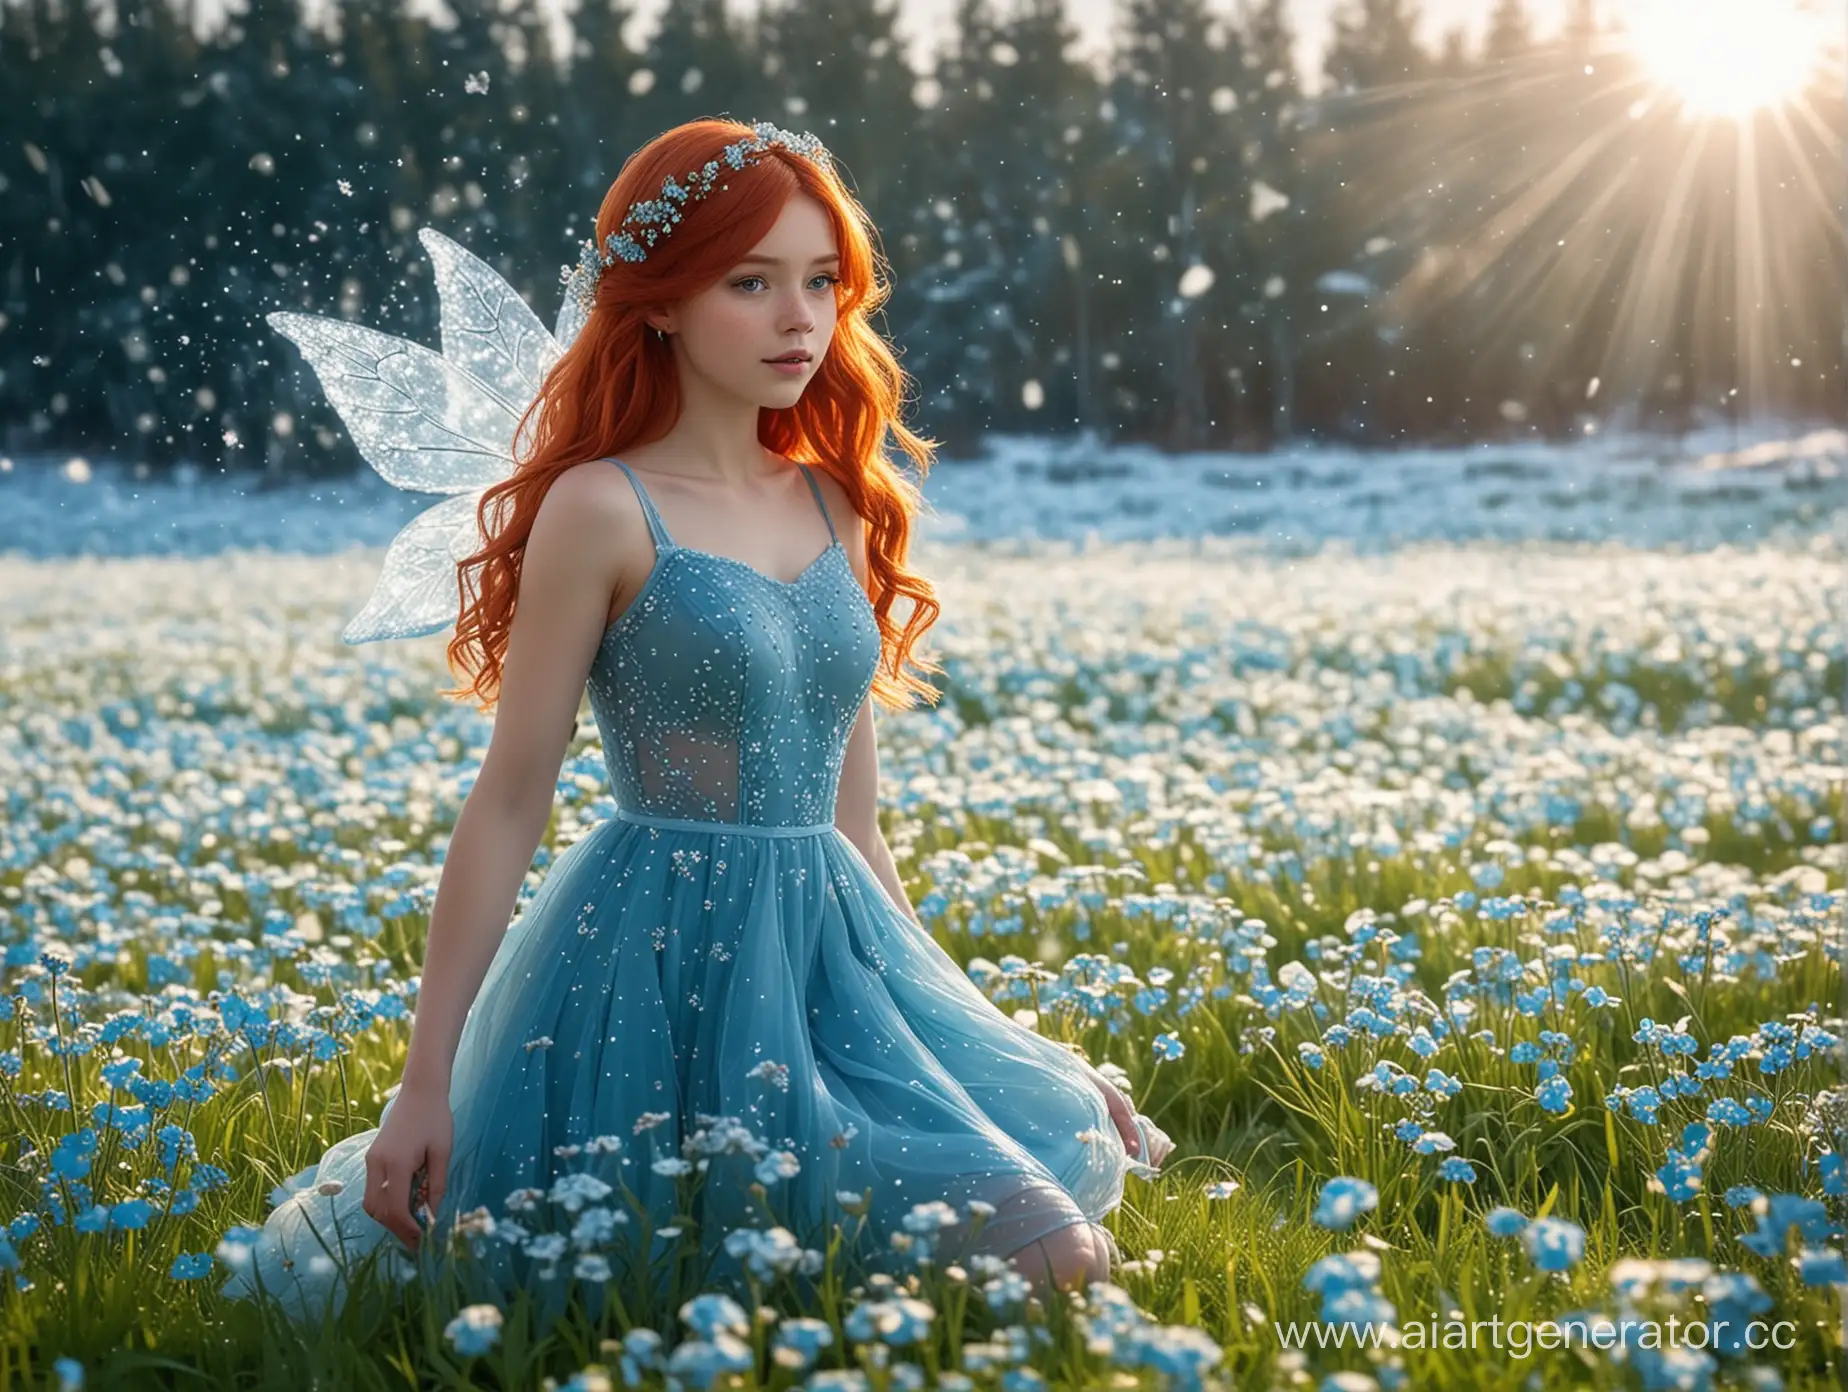 RedHaired-Fairy-Amidst-Ice-and-Snowflakes-with-Sunlit-Backdrop